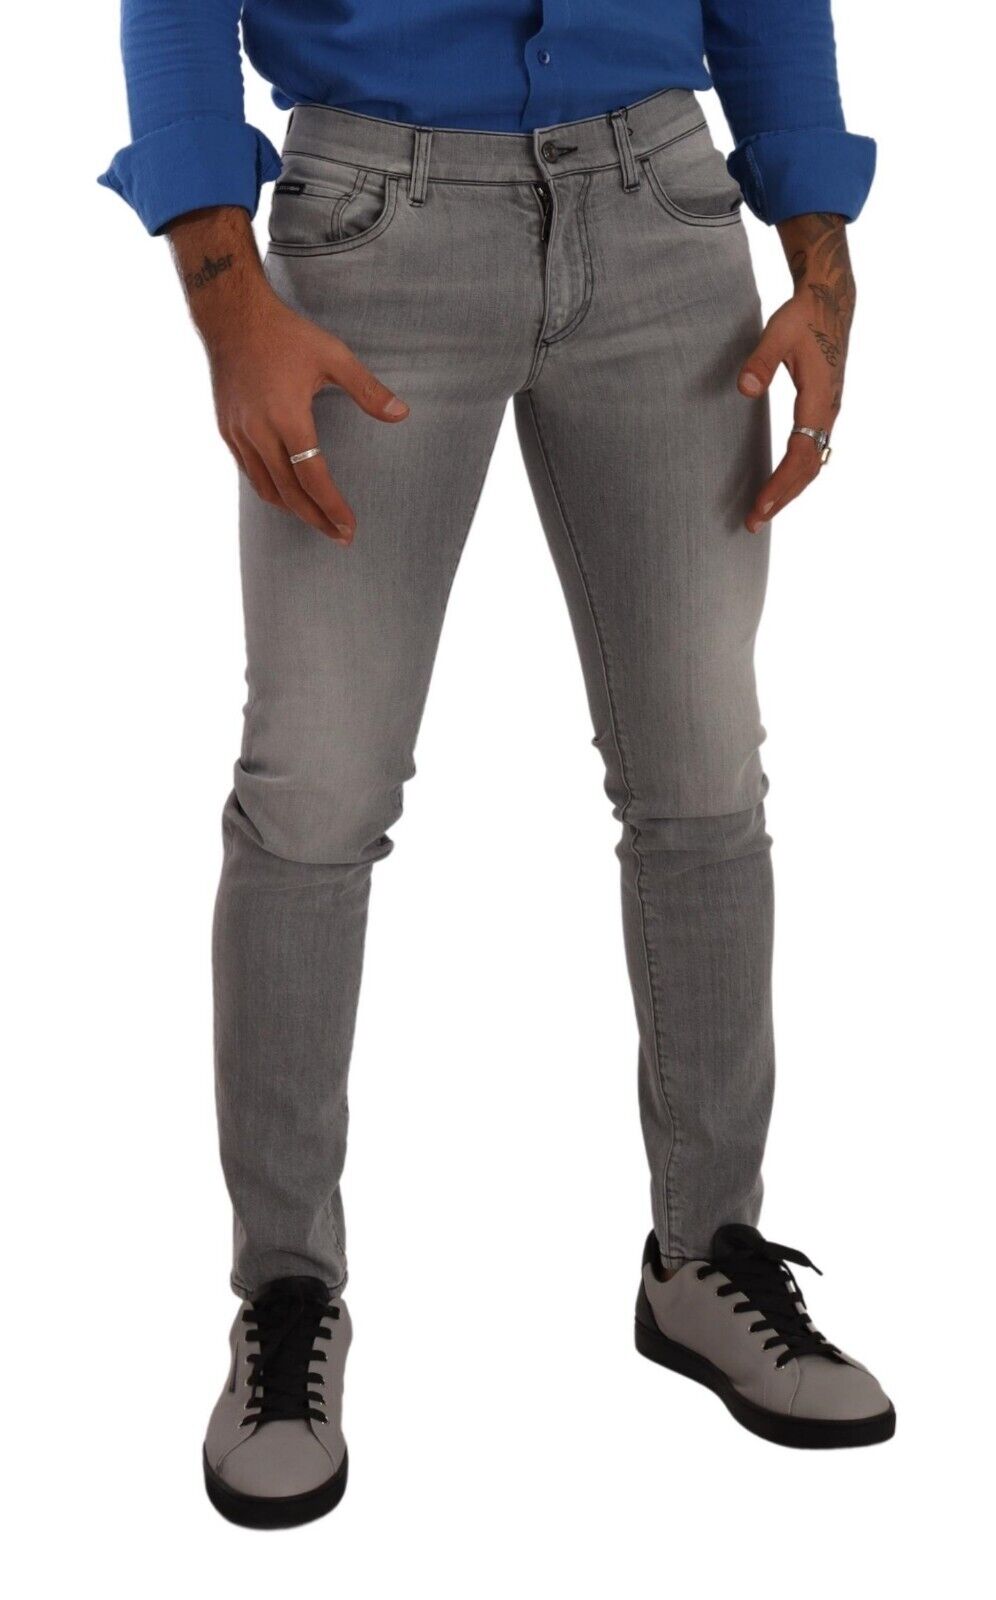 Washed Gray Cotton Skinny Denim Trouser Jeans